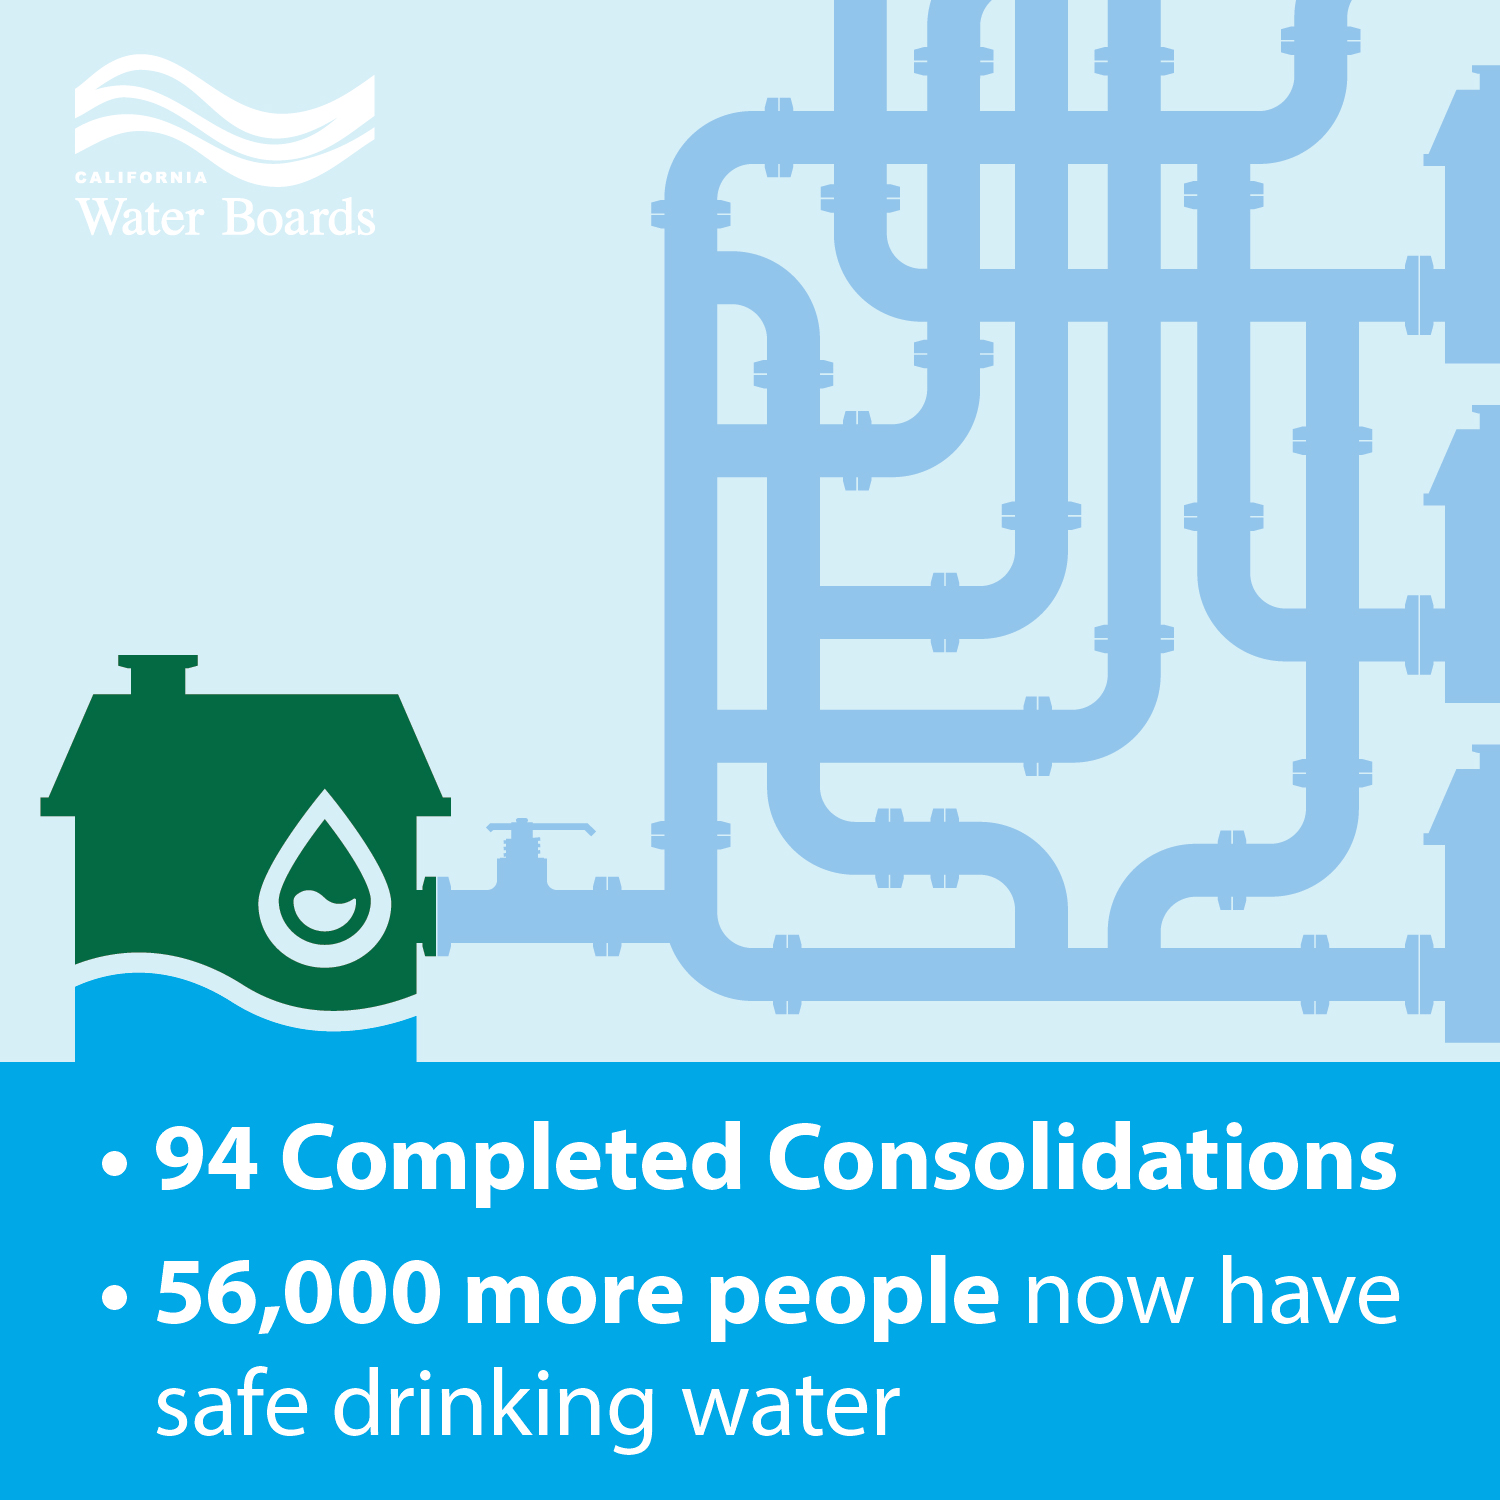 94 completed consolidations and 56,000 more people who now have safe drinking water